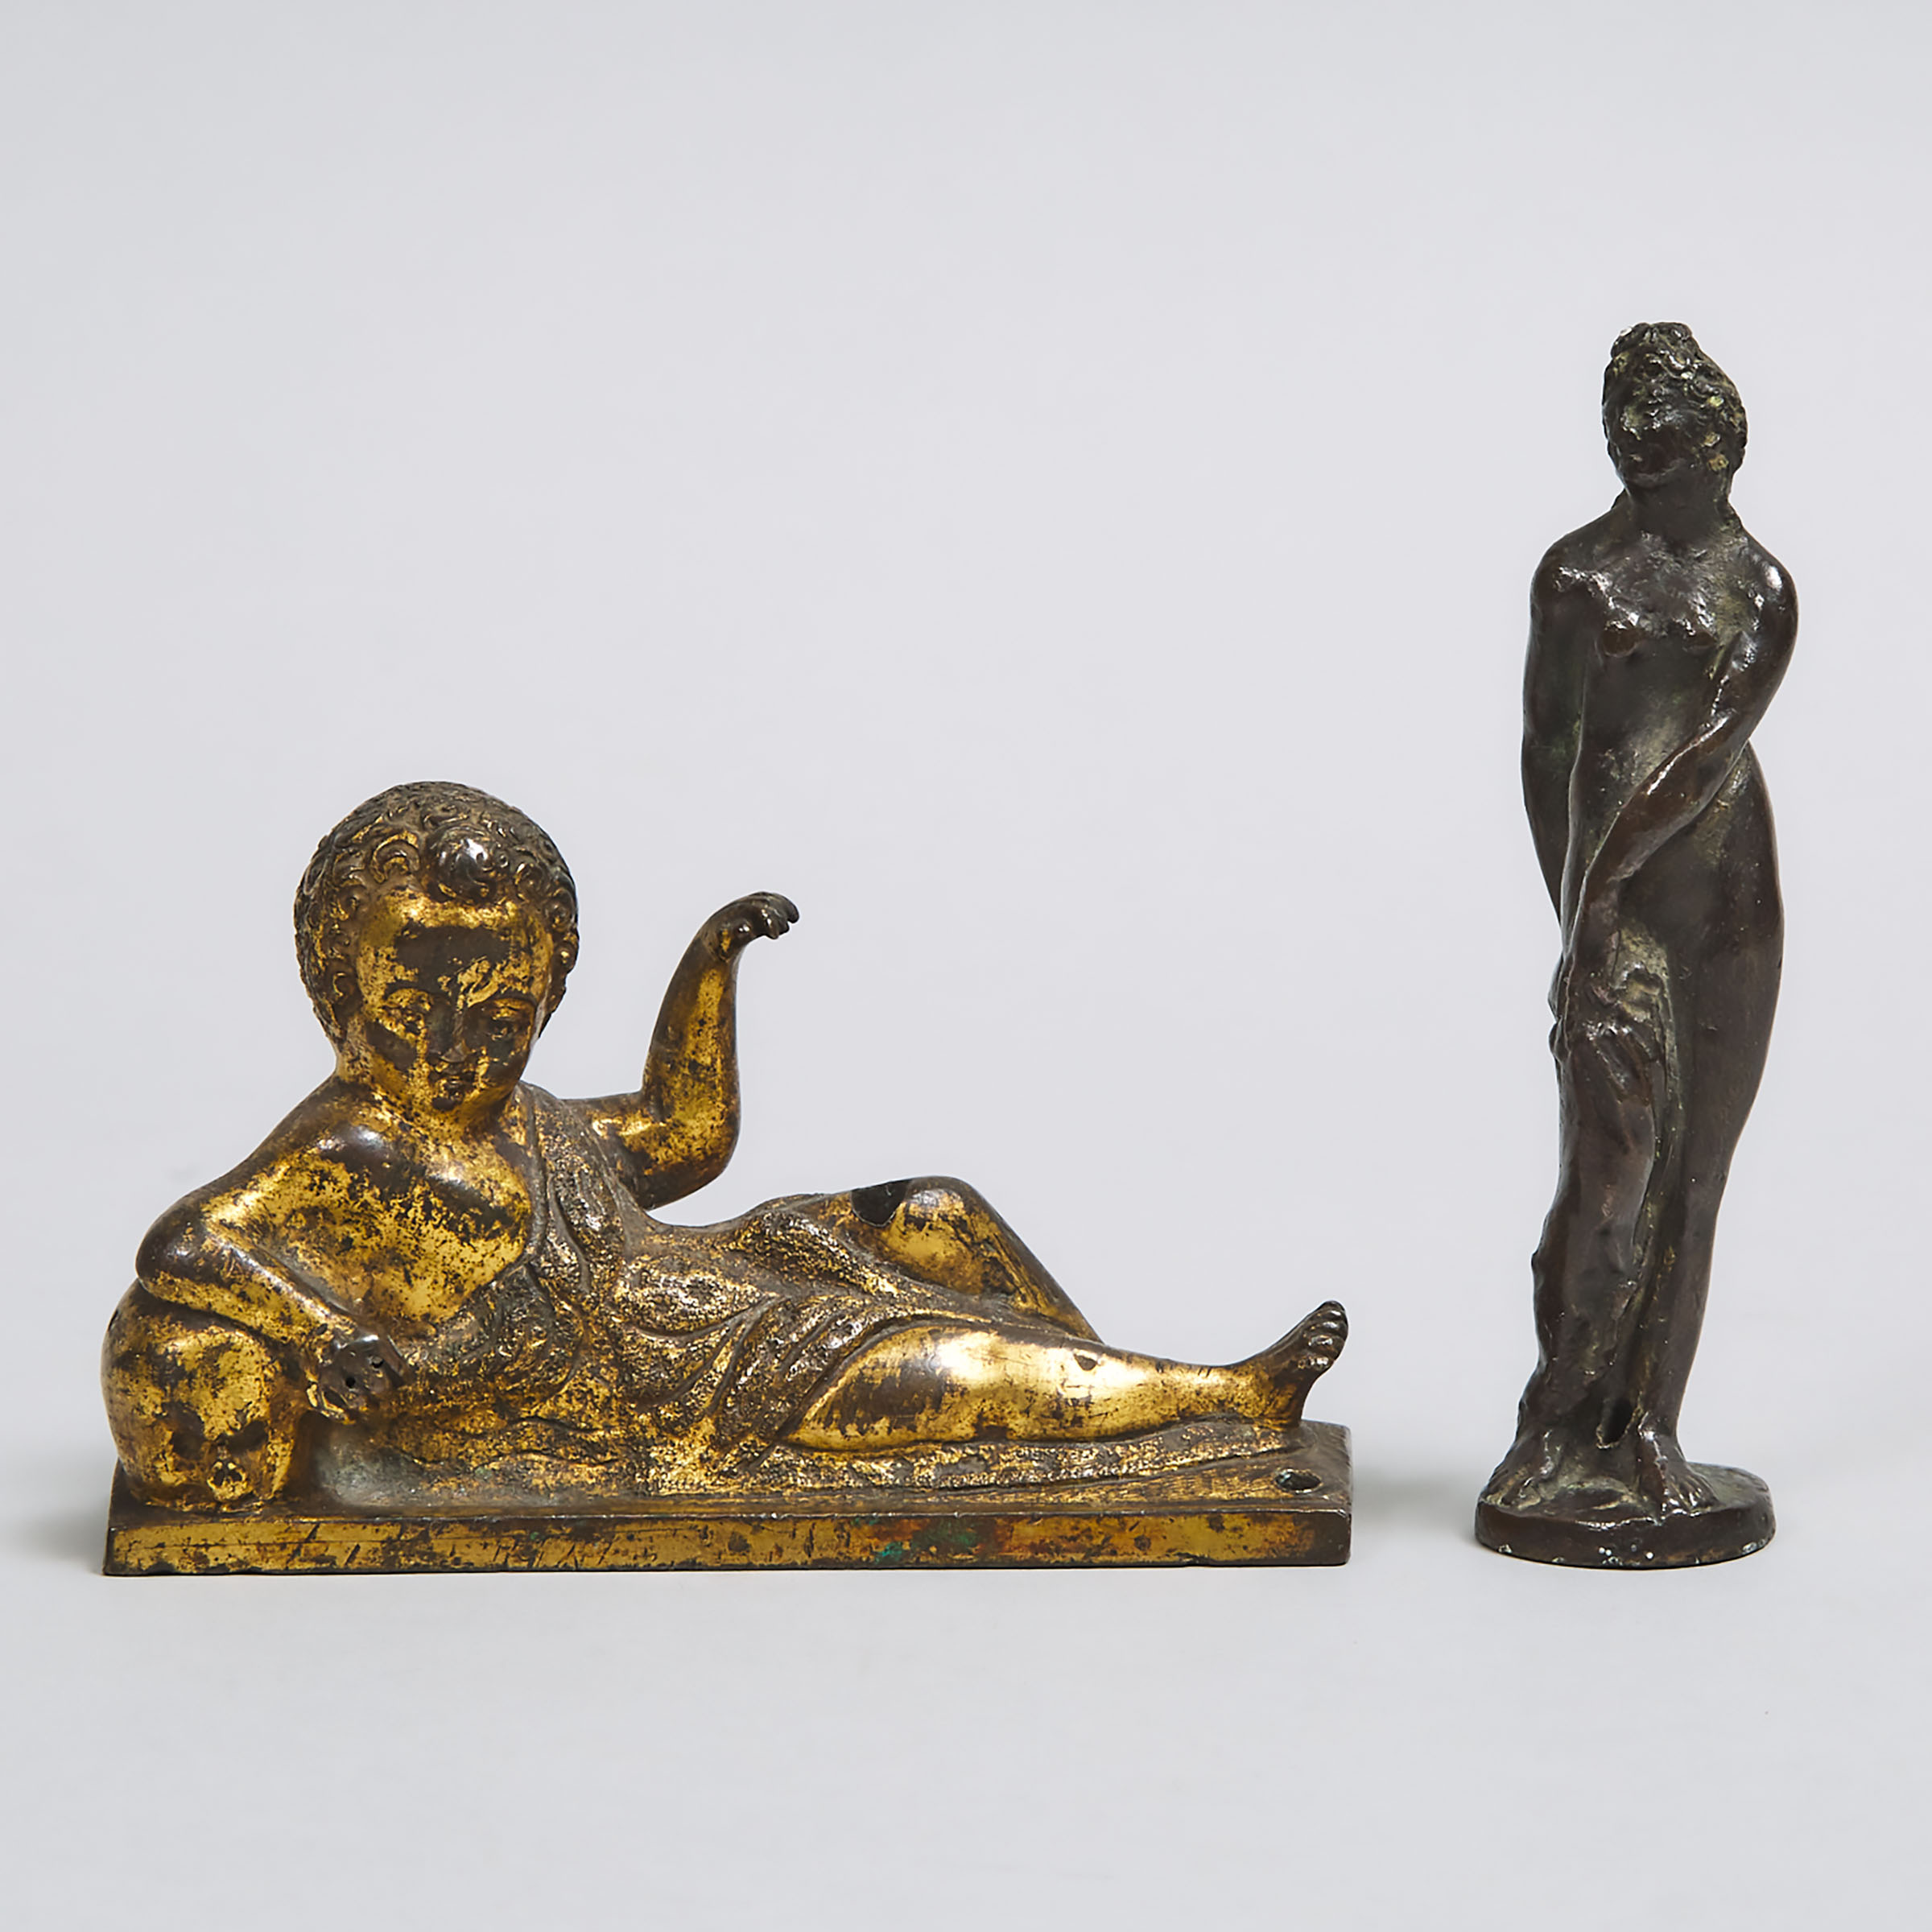 Two Small Classical Bronze Figures, 18th/19th centuries